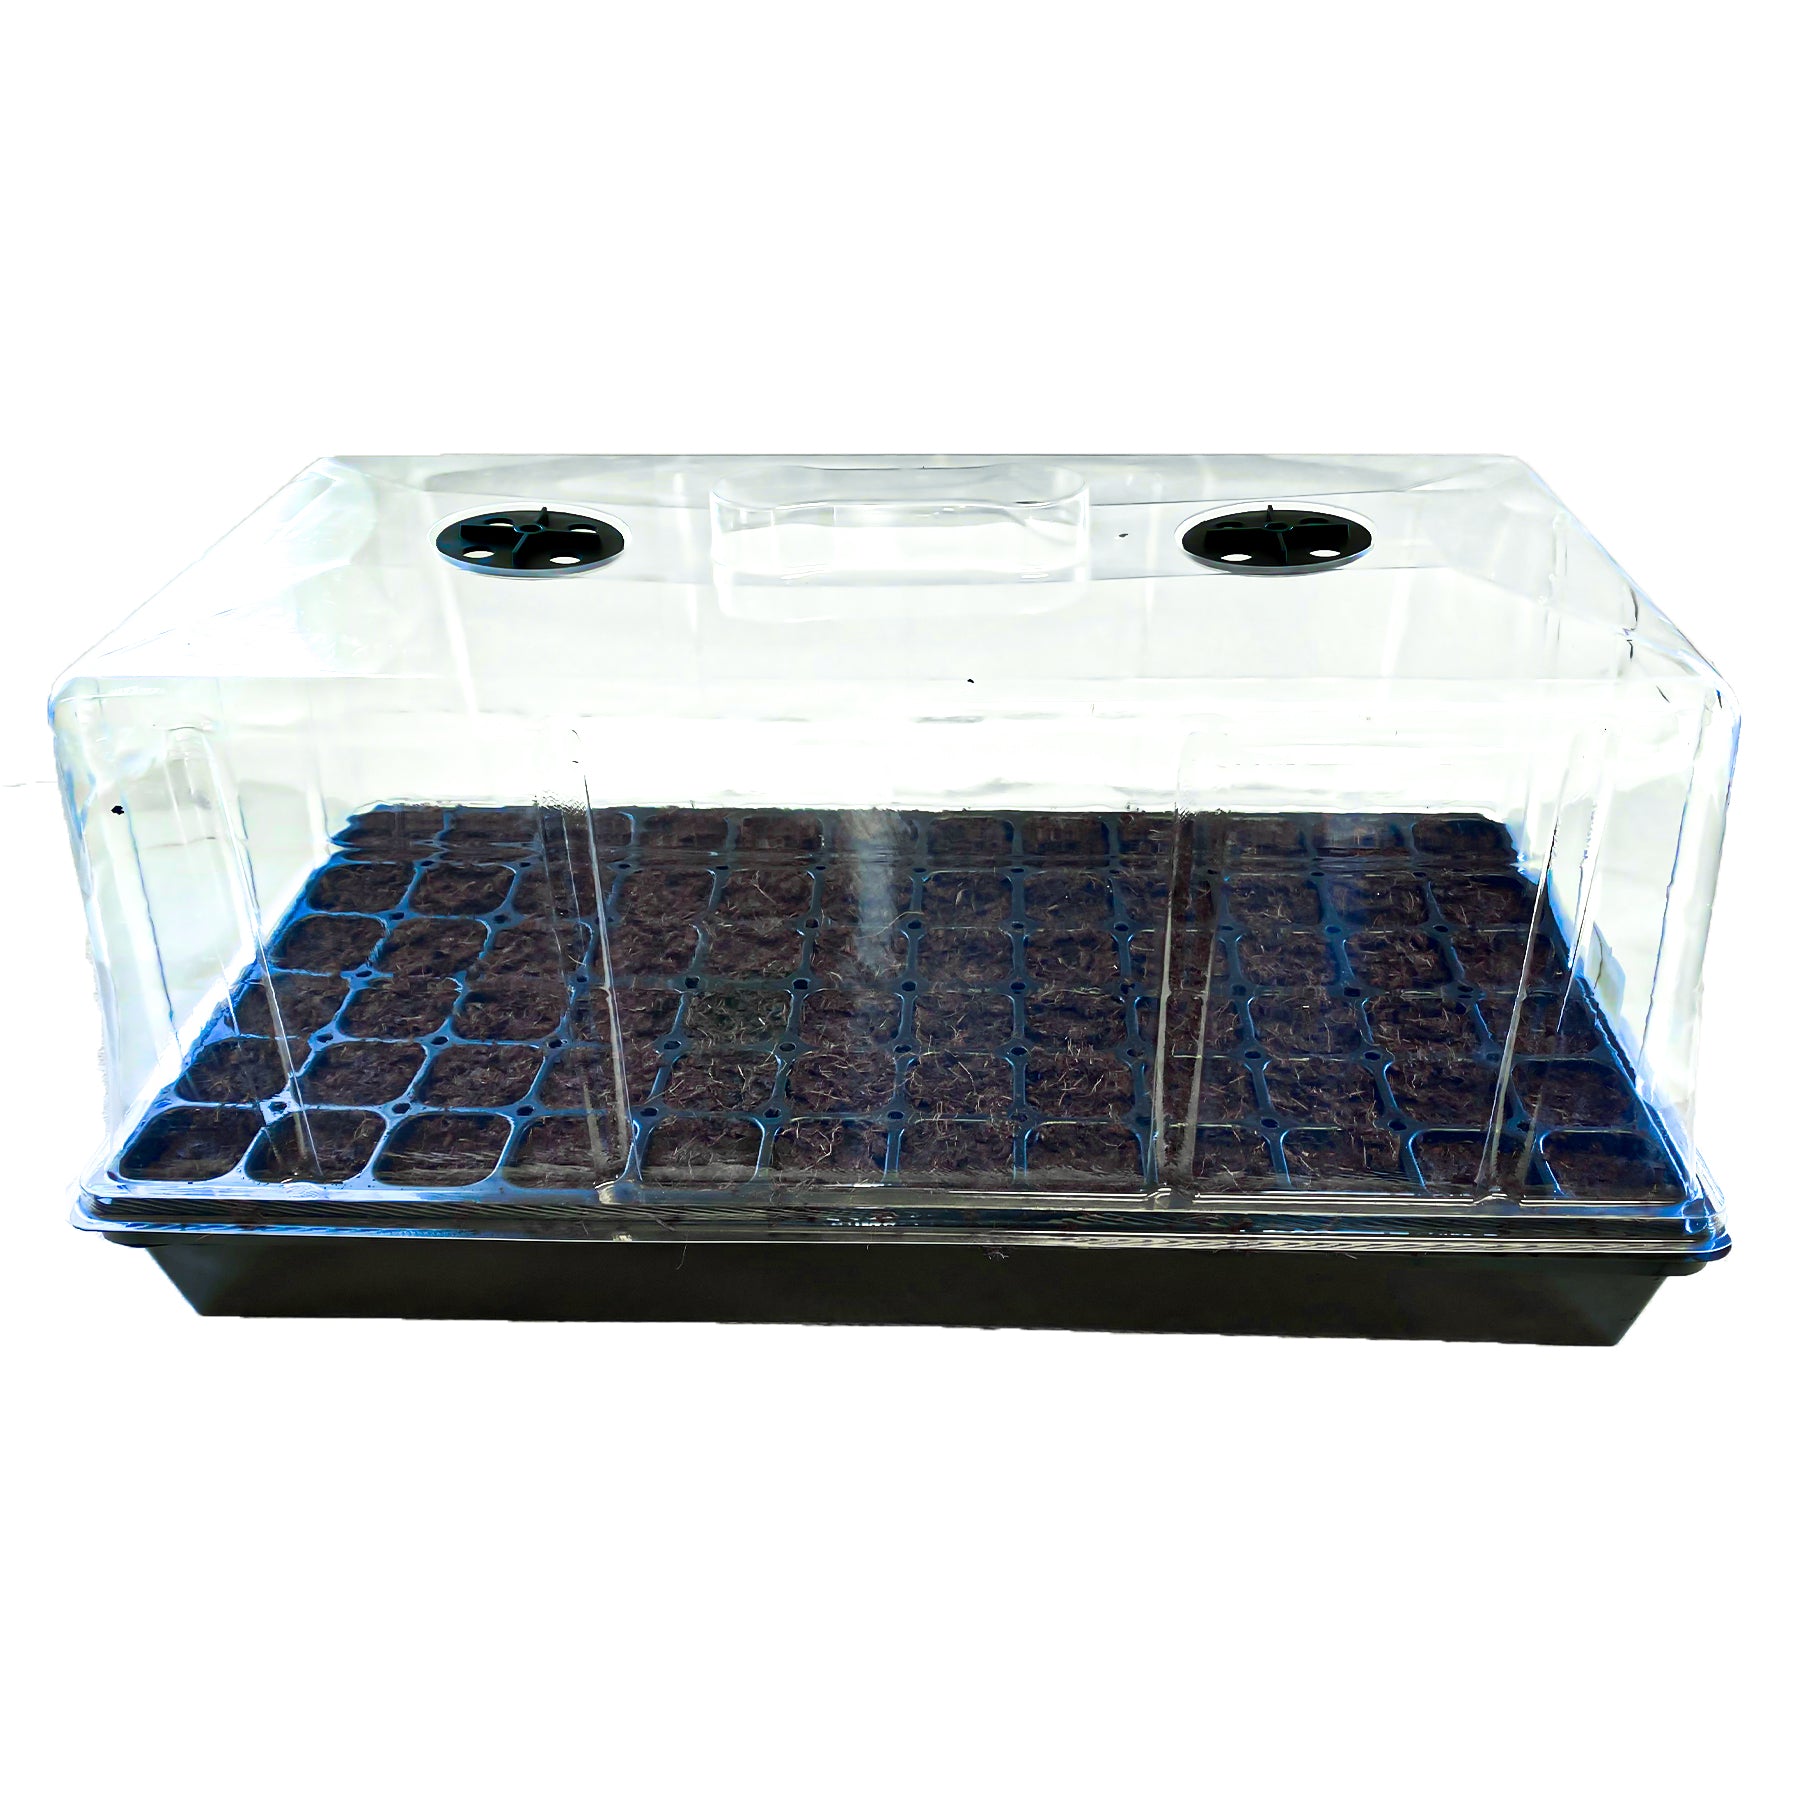 Viagrow Seedling Germination Kit with Tall 7 in. Dome, Tray, Insert and Seedling Media, 5 Pack